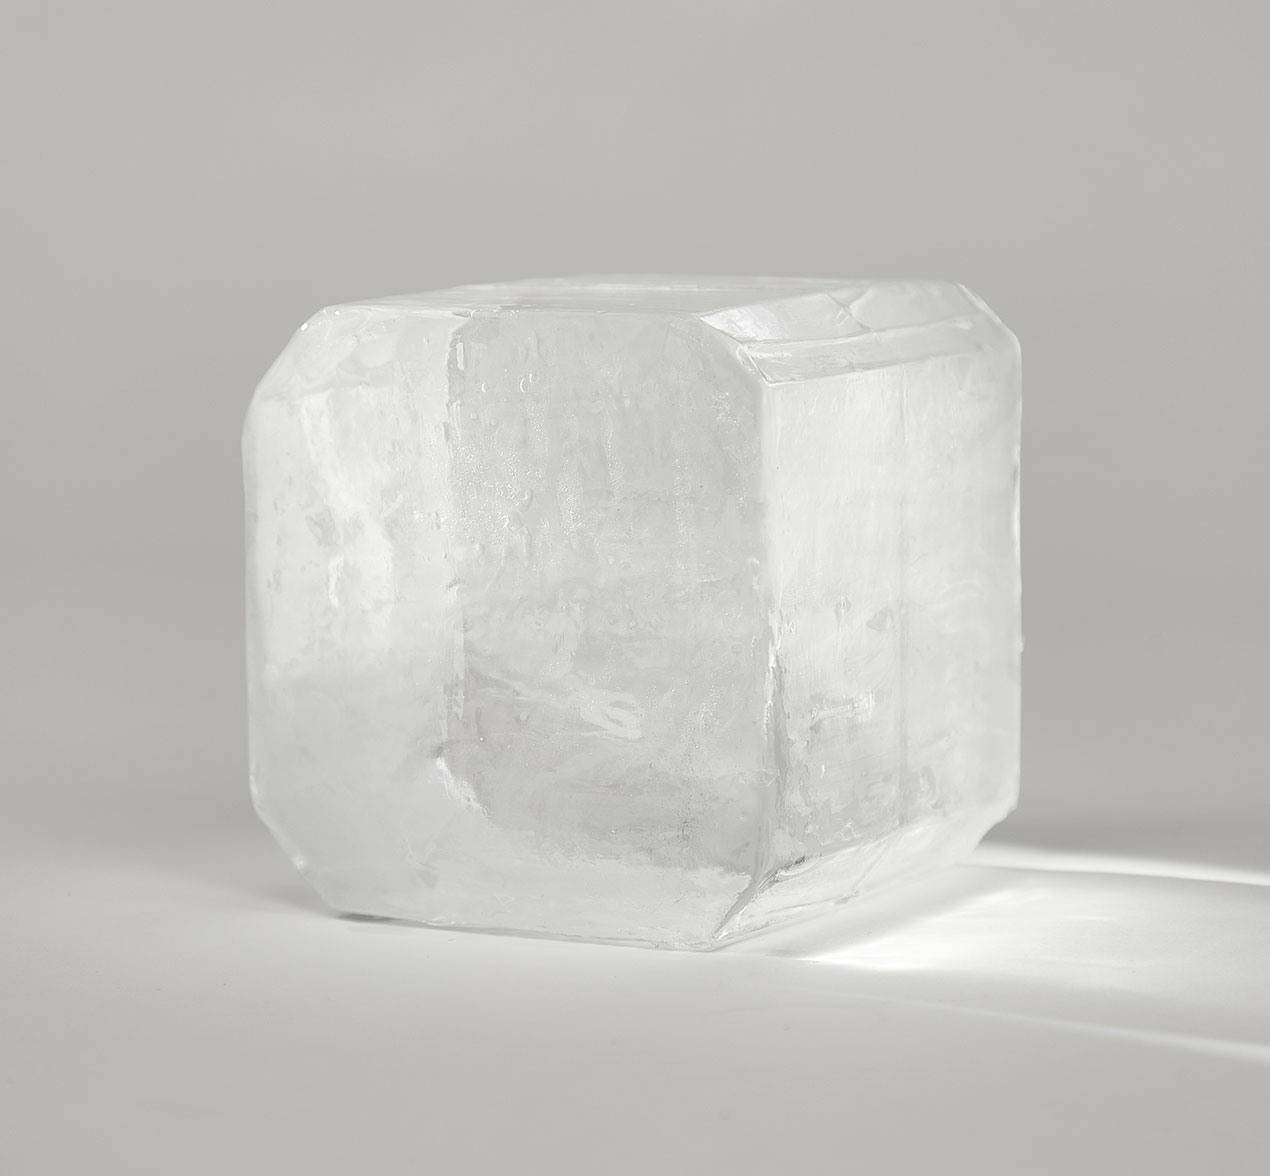 https://www.monogram.com/images/forge/Feature-Kentucky-Straight-Ice@2x.jpg